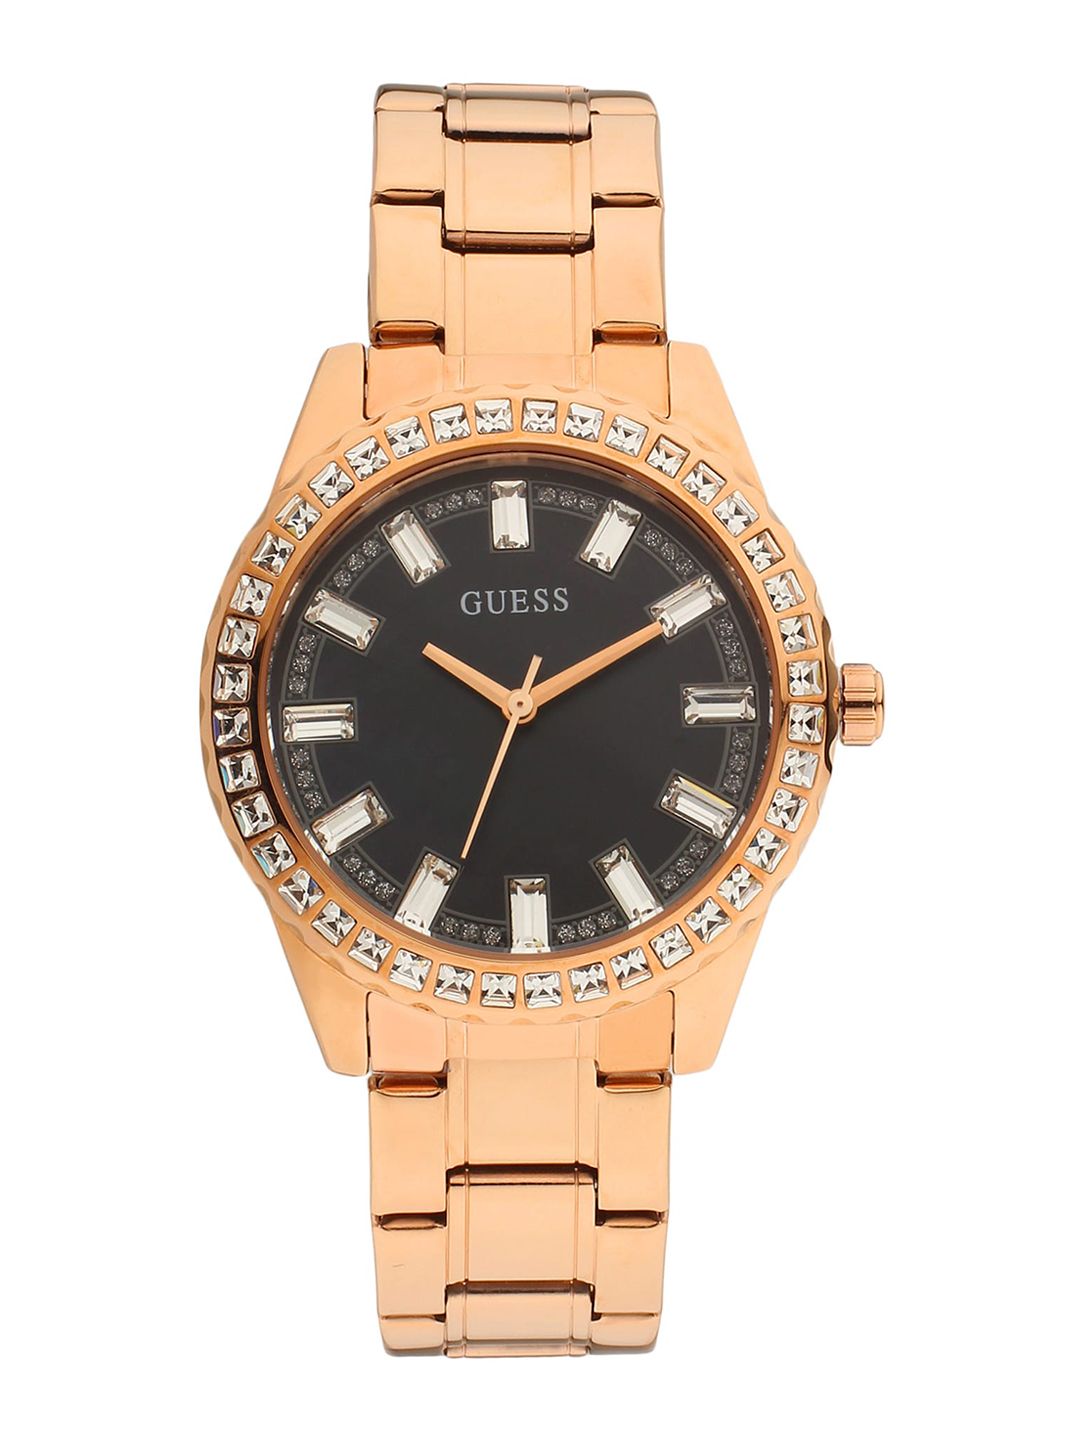 GUESS Women Rose Gold-Toned Embellished Dial Analogue Watch GW0111L3 Price in India